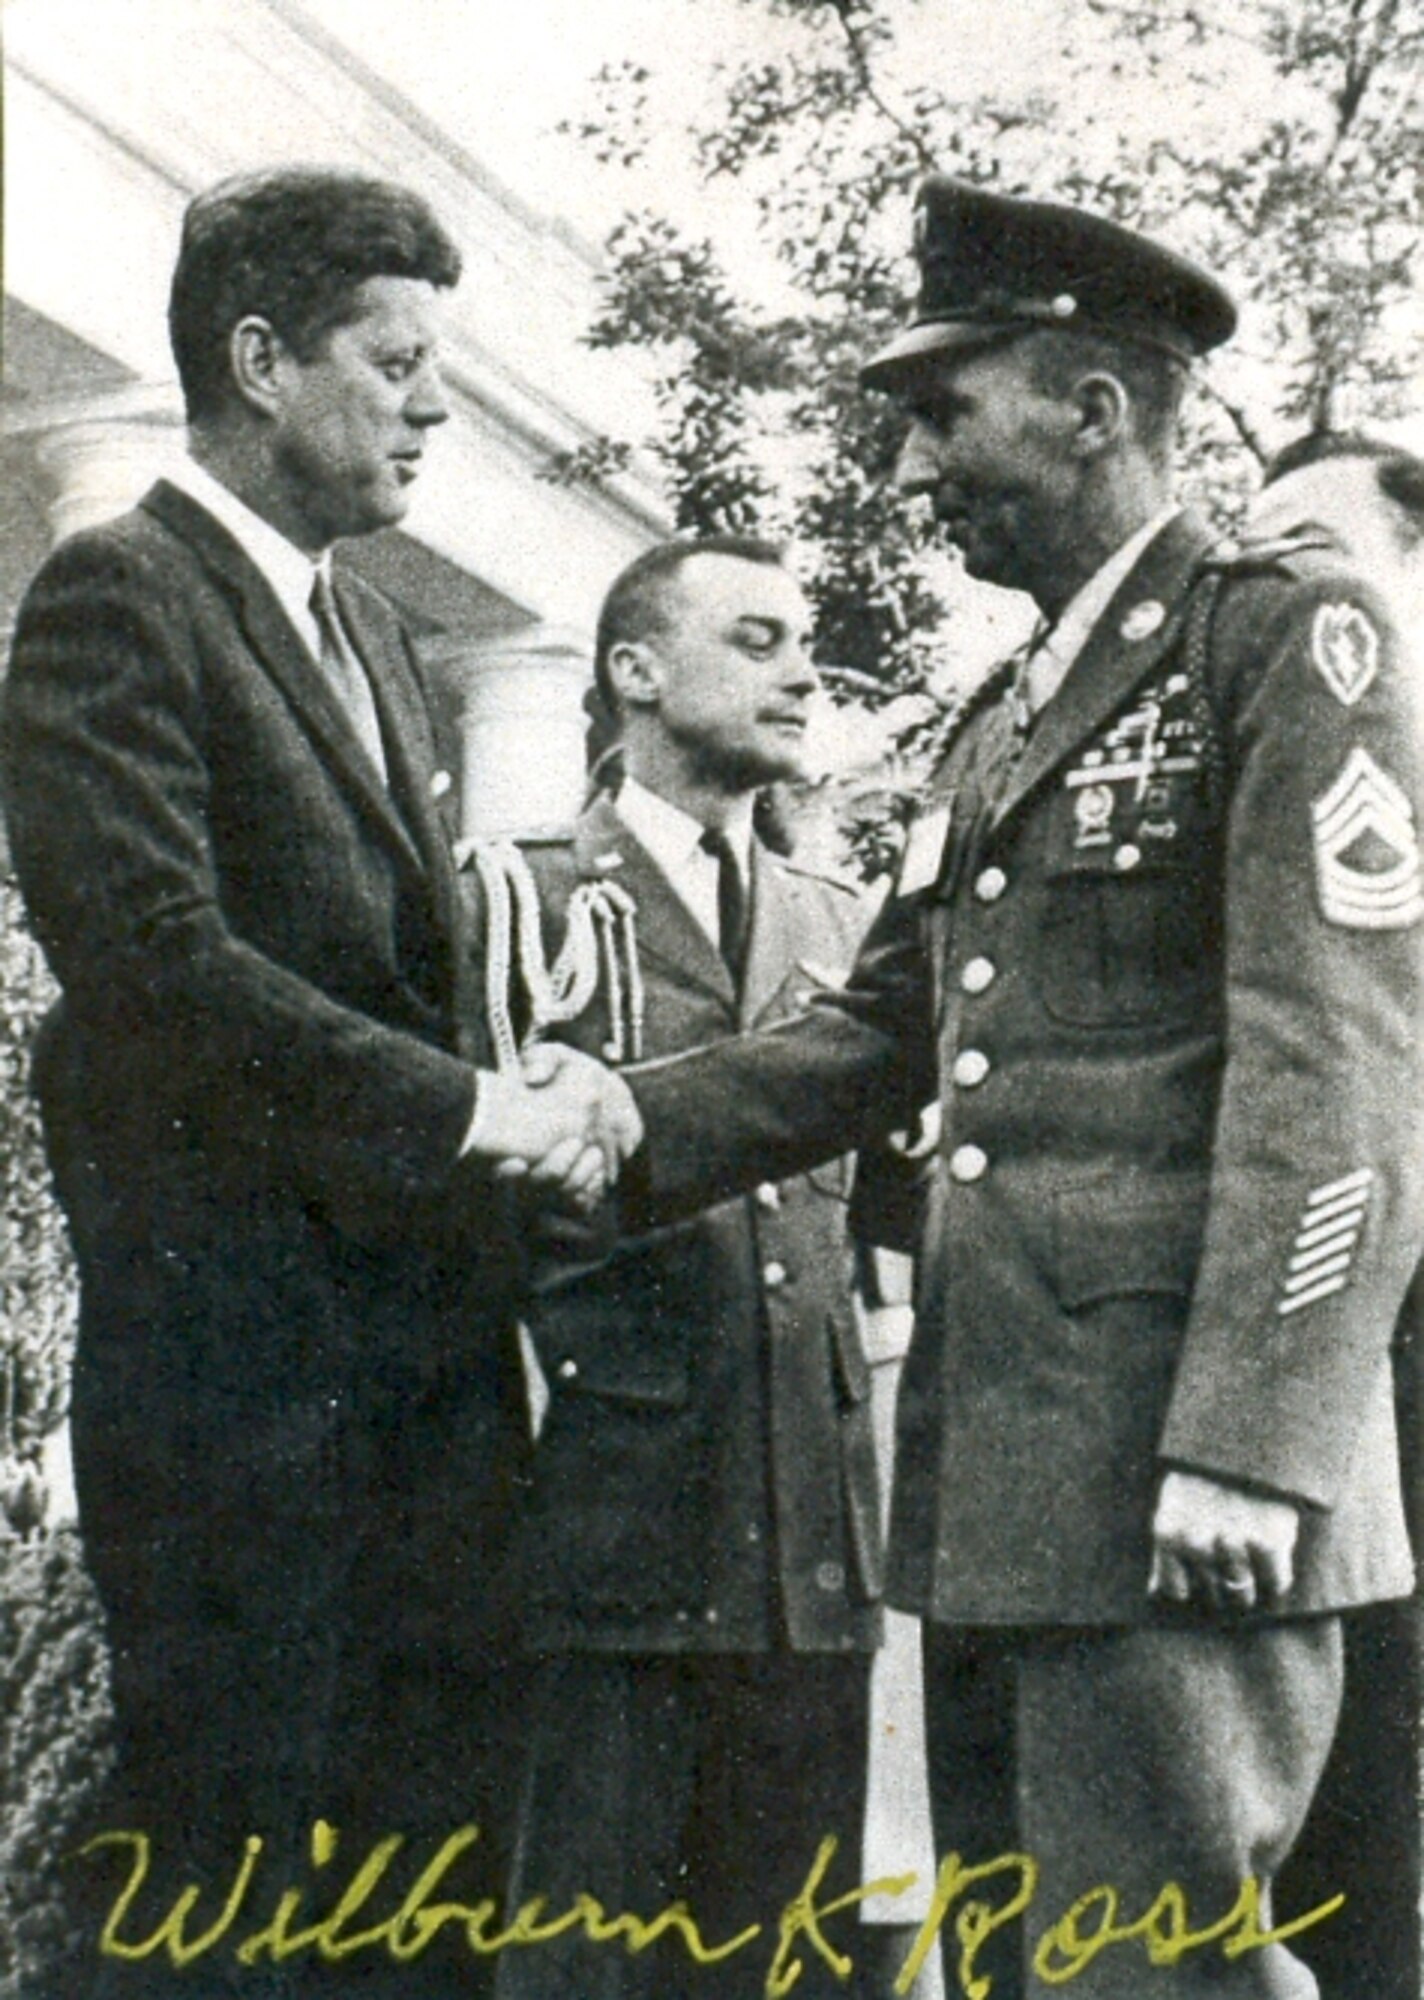 Master Sgt. Wilburn K. Ross (right) meets President John F. Kennedy in May, 1963. (Courtesy Photo)